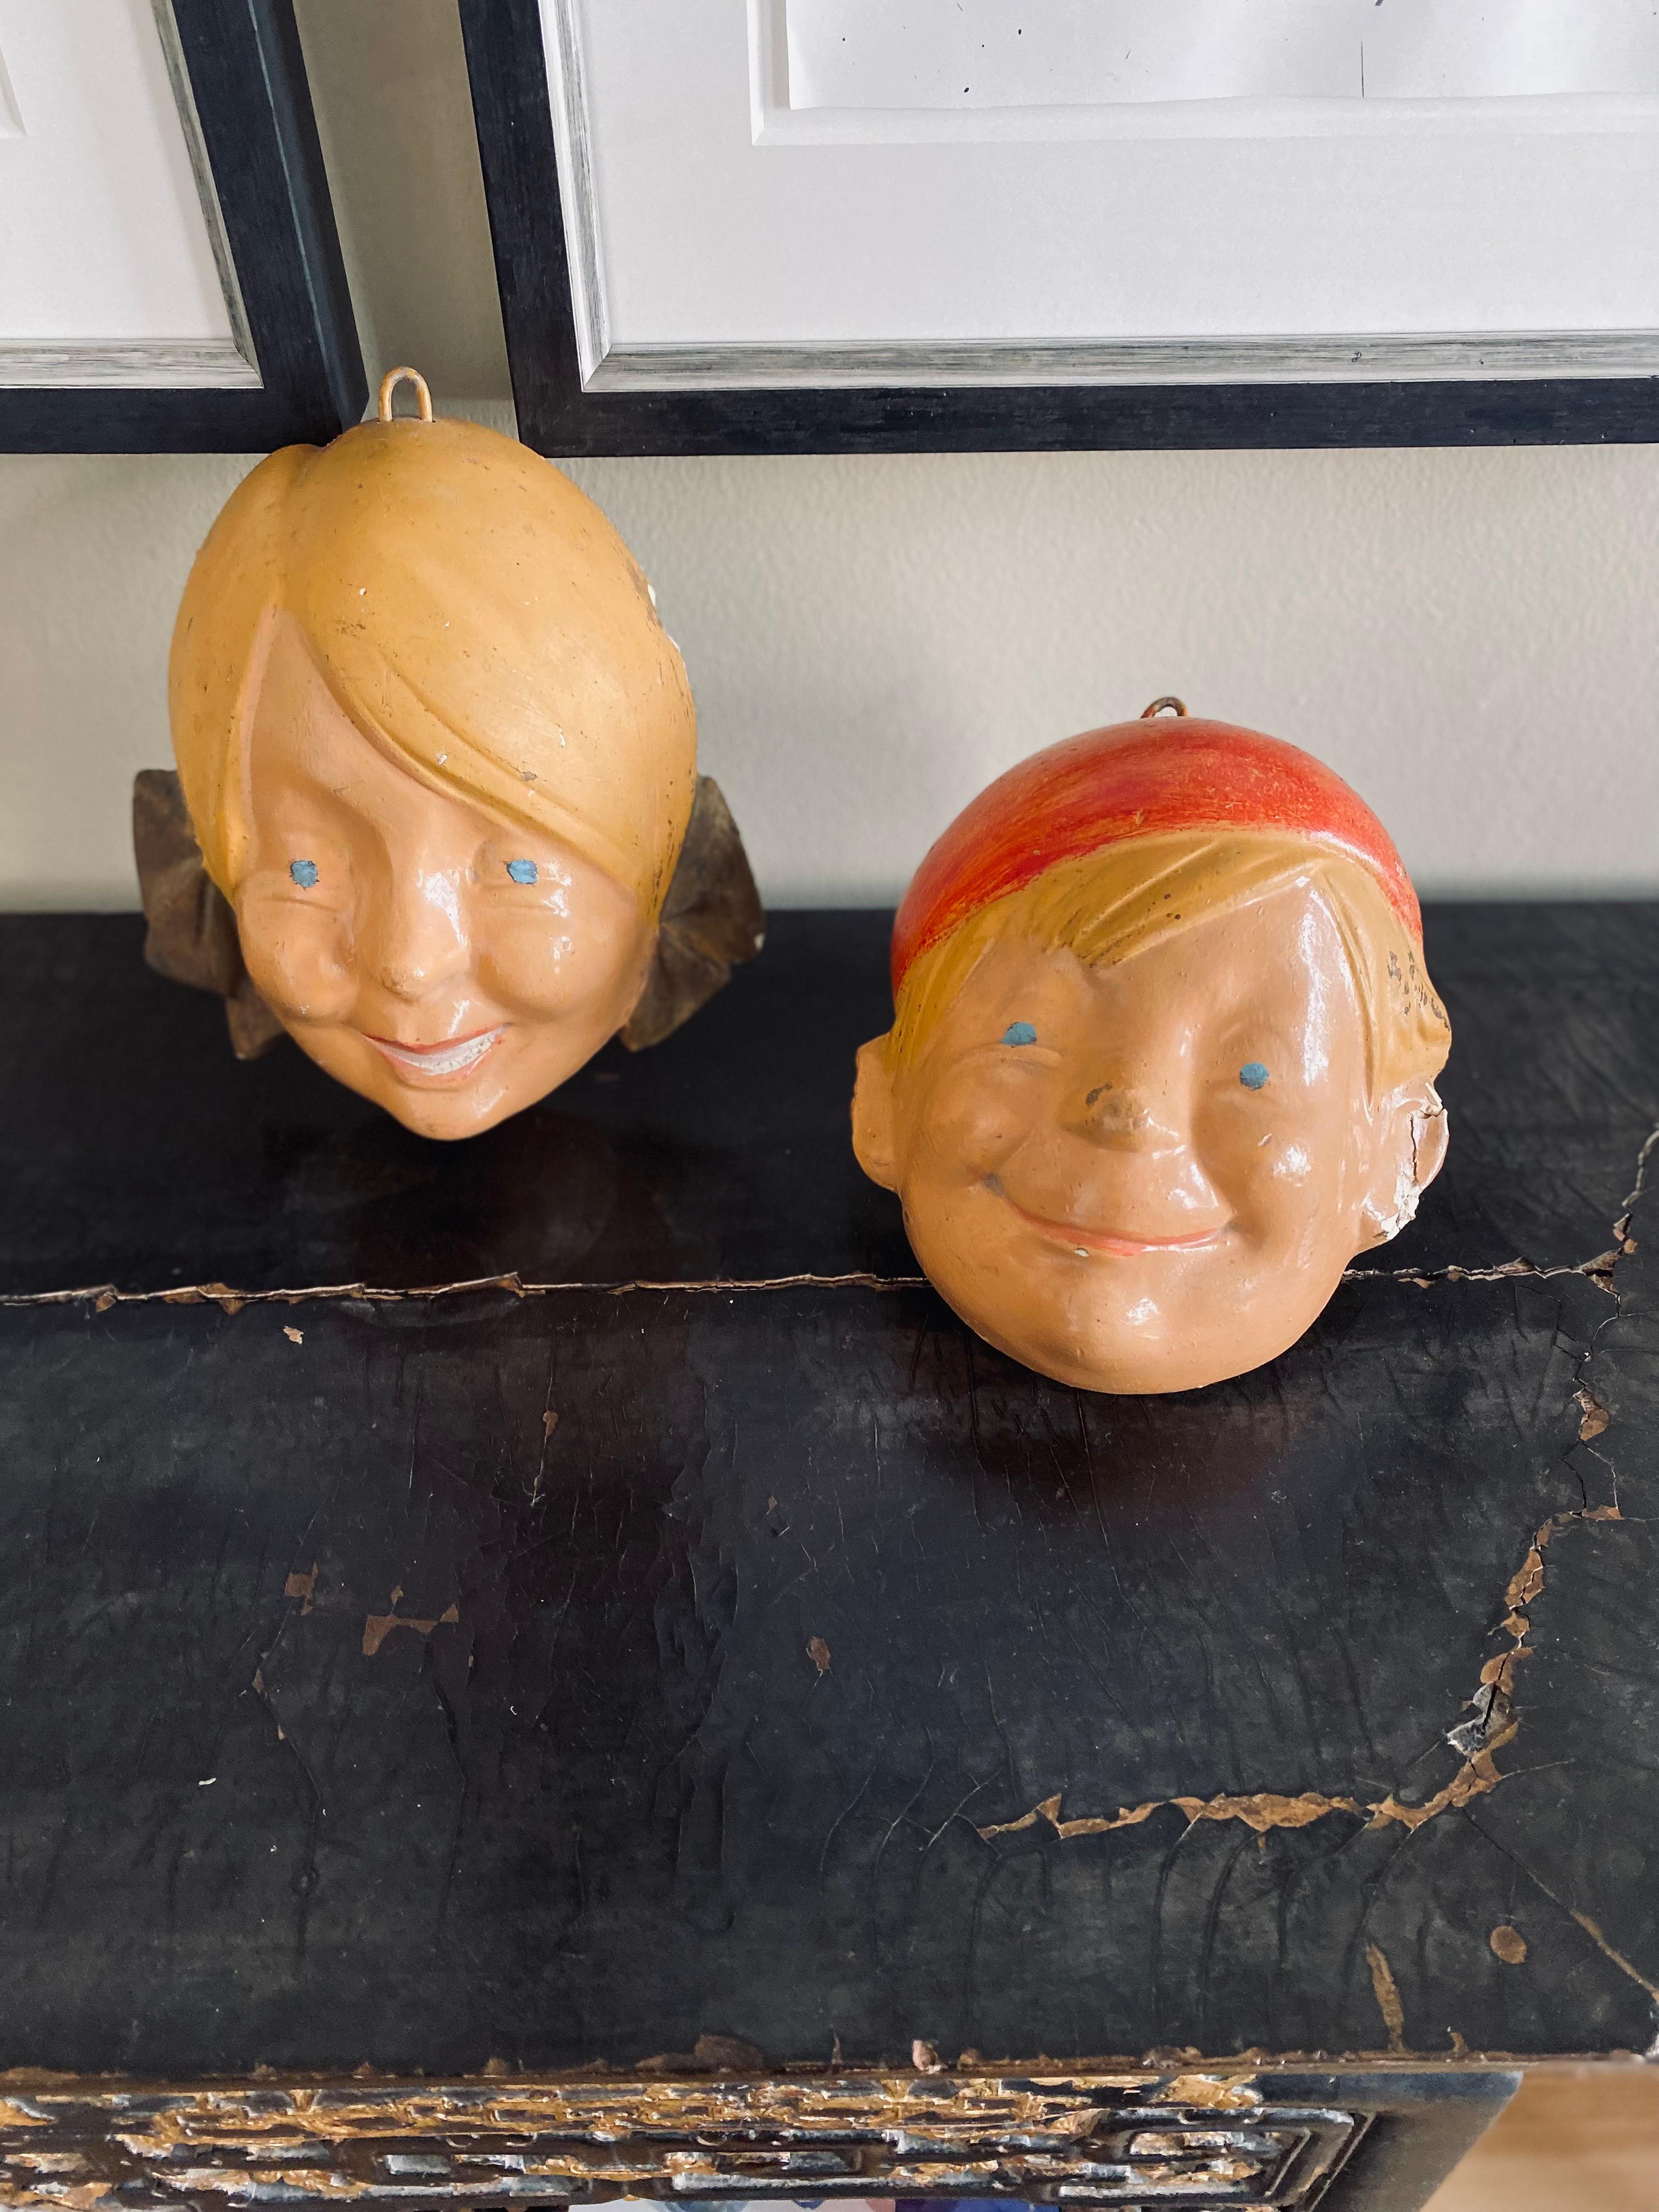 If that isn't an unusual wall decoration for a child's room or a children's shop. The heads are painted plaster casts. The heads were not originally intended as wall decorations but must have served as a model form on which to make masks for